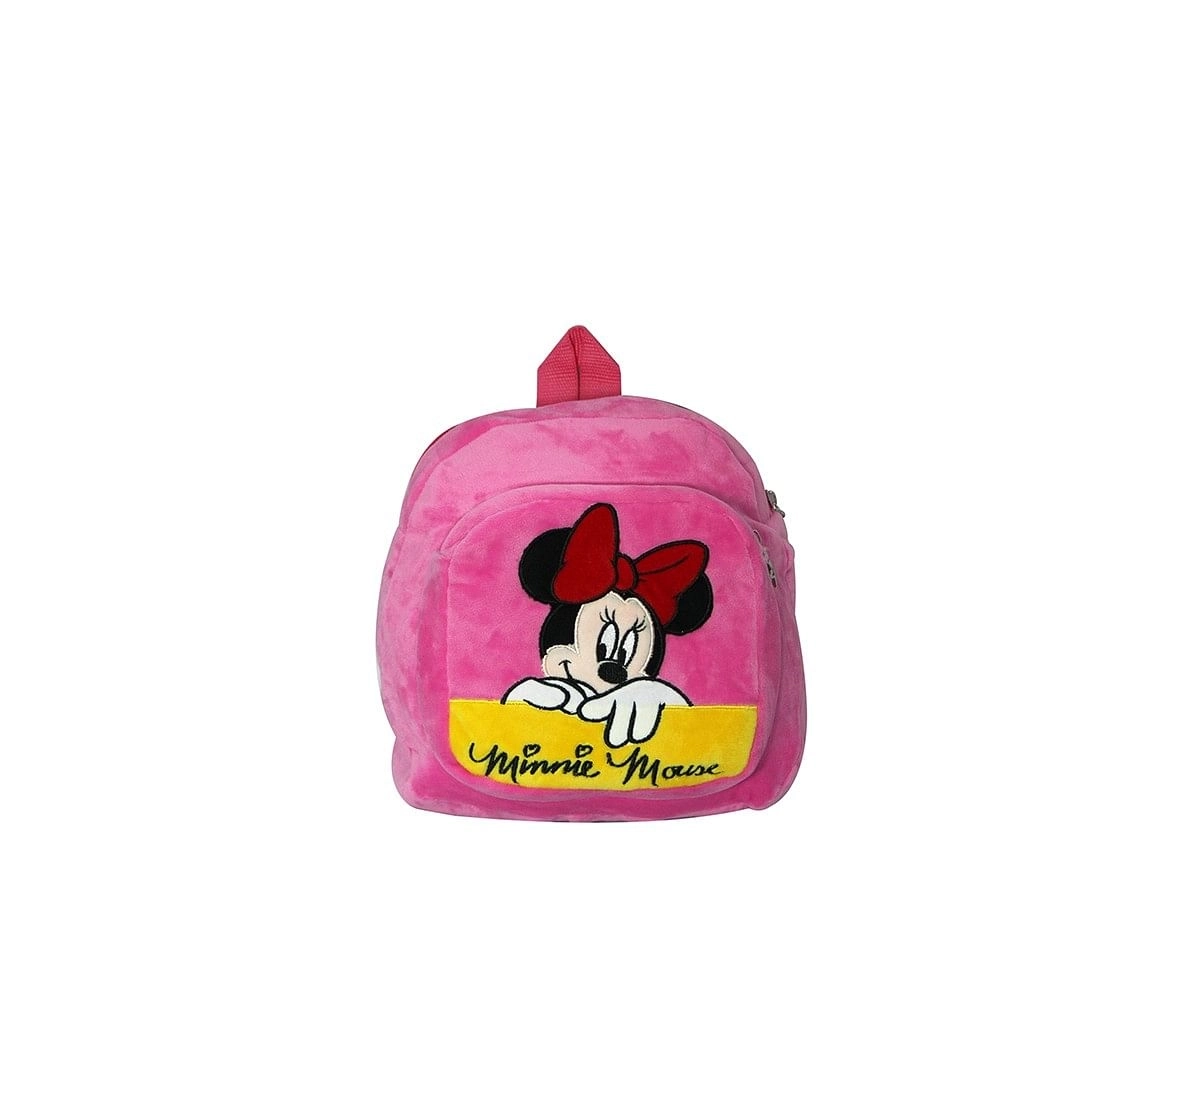 Disney Happiness Mickey Mouse Backpack_Red Plush Accessories for Kids age 12M+ - 25.4 Cm 